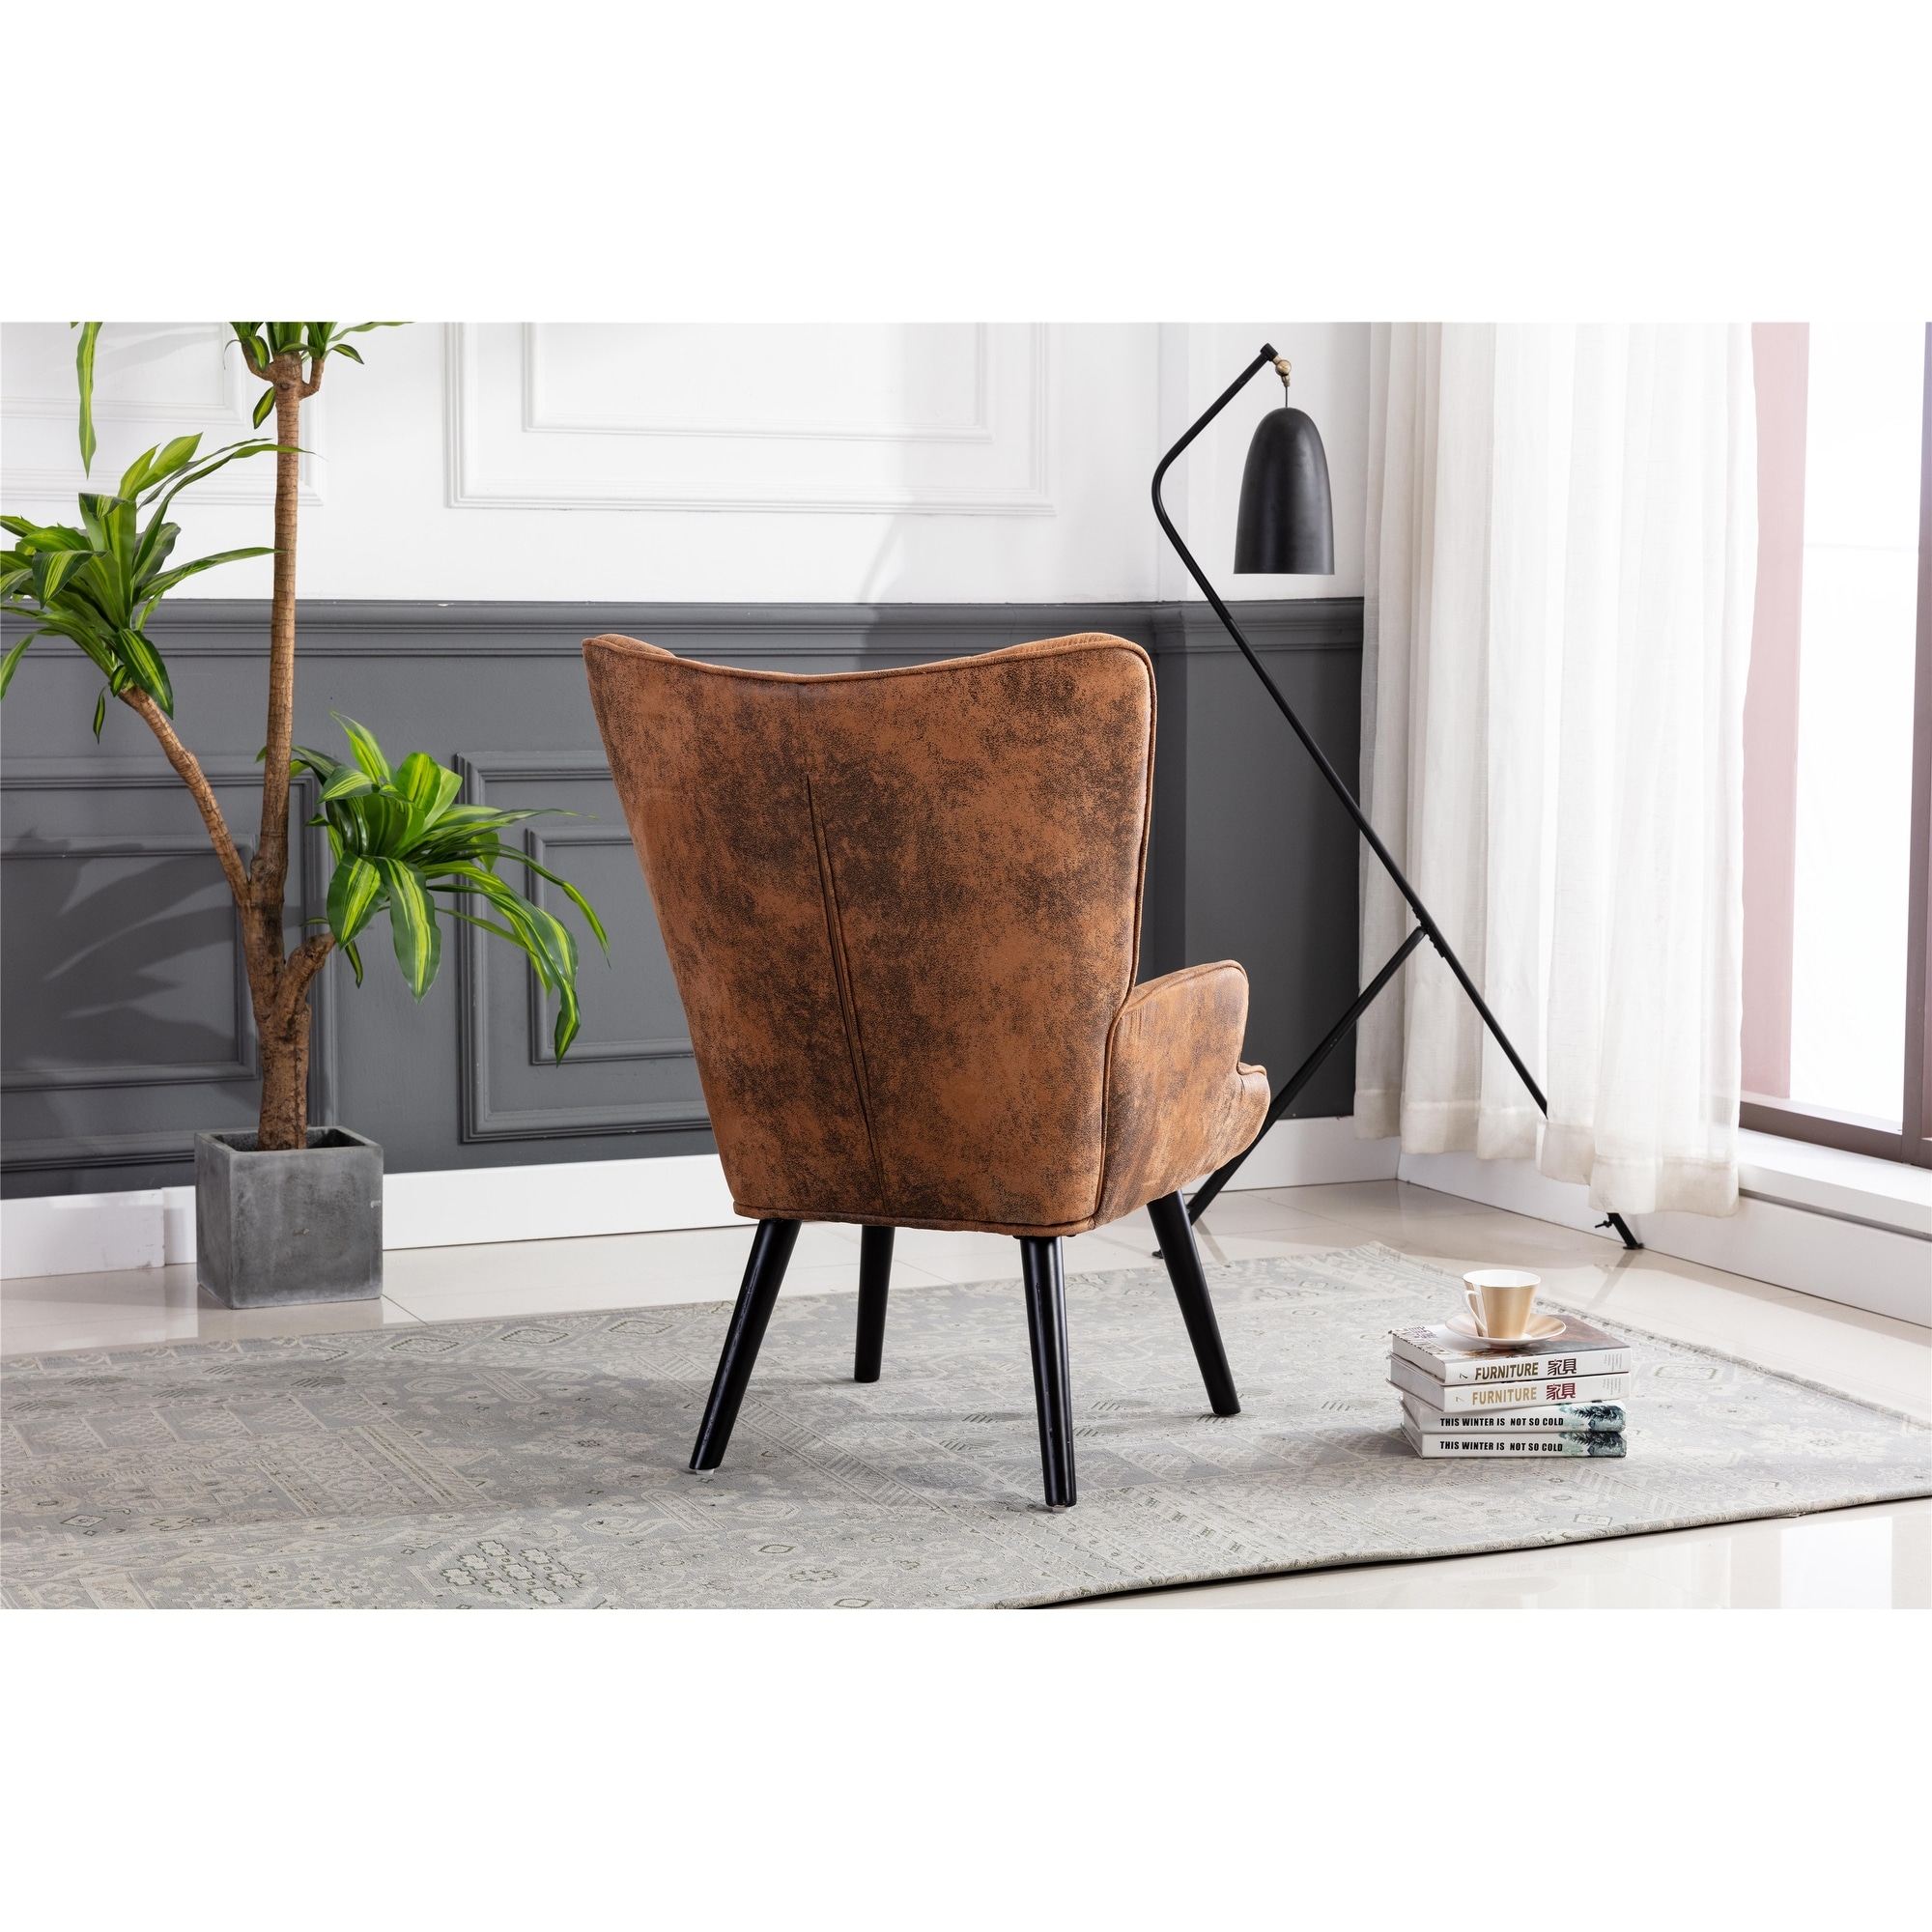 HOMCOM Small Button-Tufted Accent Chair Mid-Back Leisure Armchair